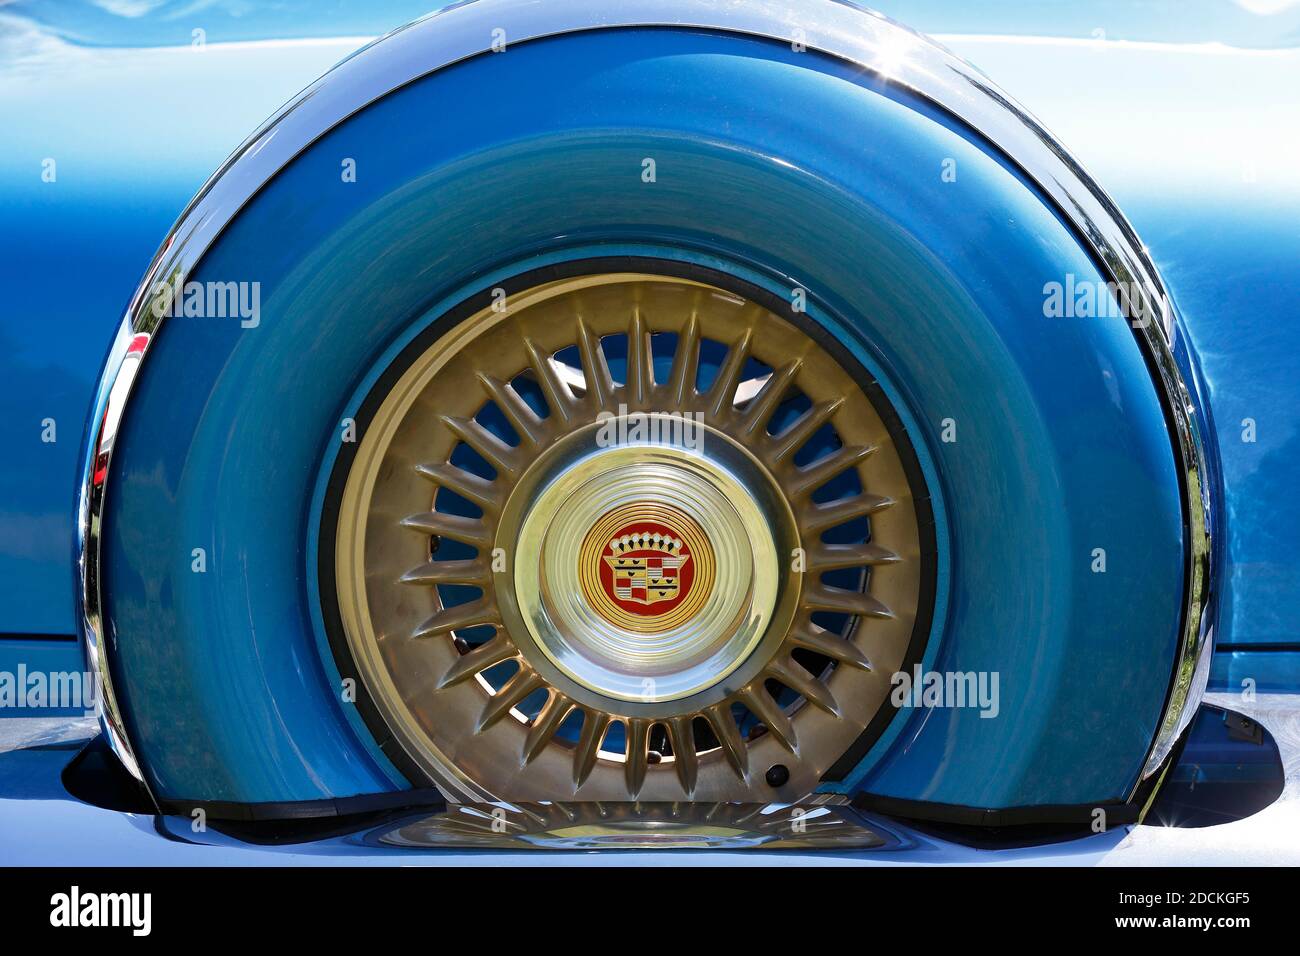 Cadillac emblem in the rim of the spare tyre at the rear of a 1956 Cadillac Eldorado classic car, historic vehicle, Germany Stock Photo